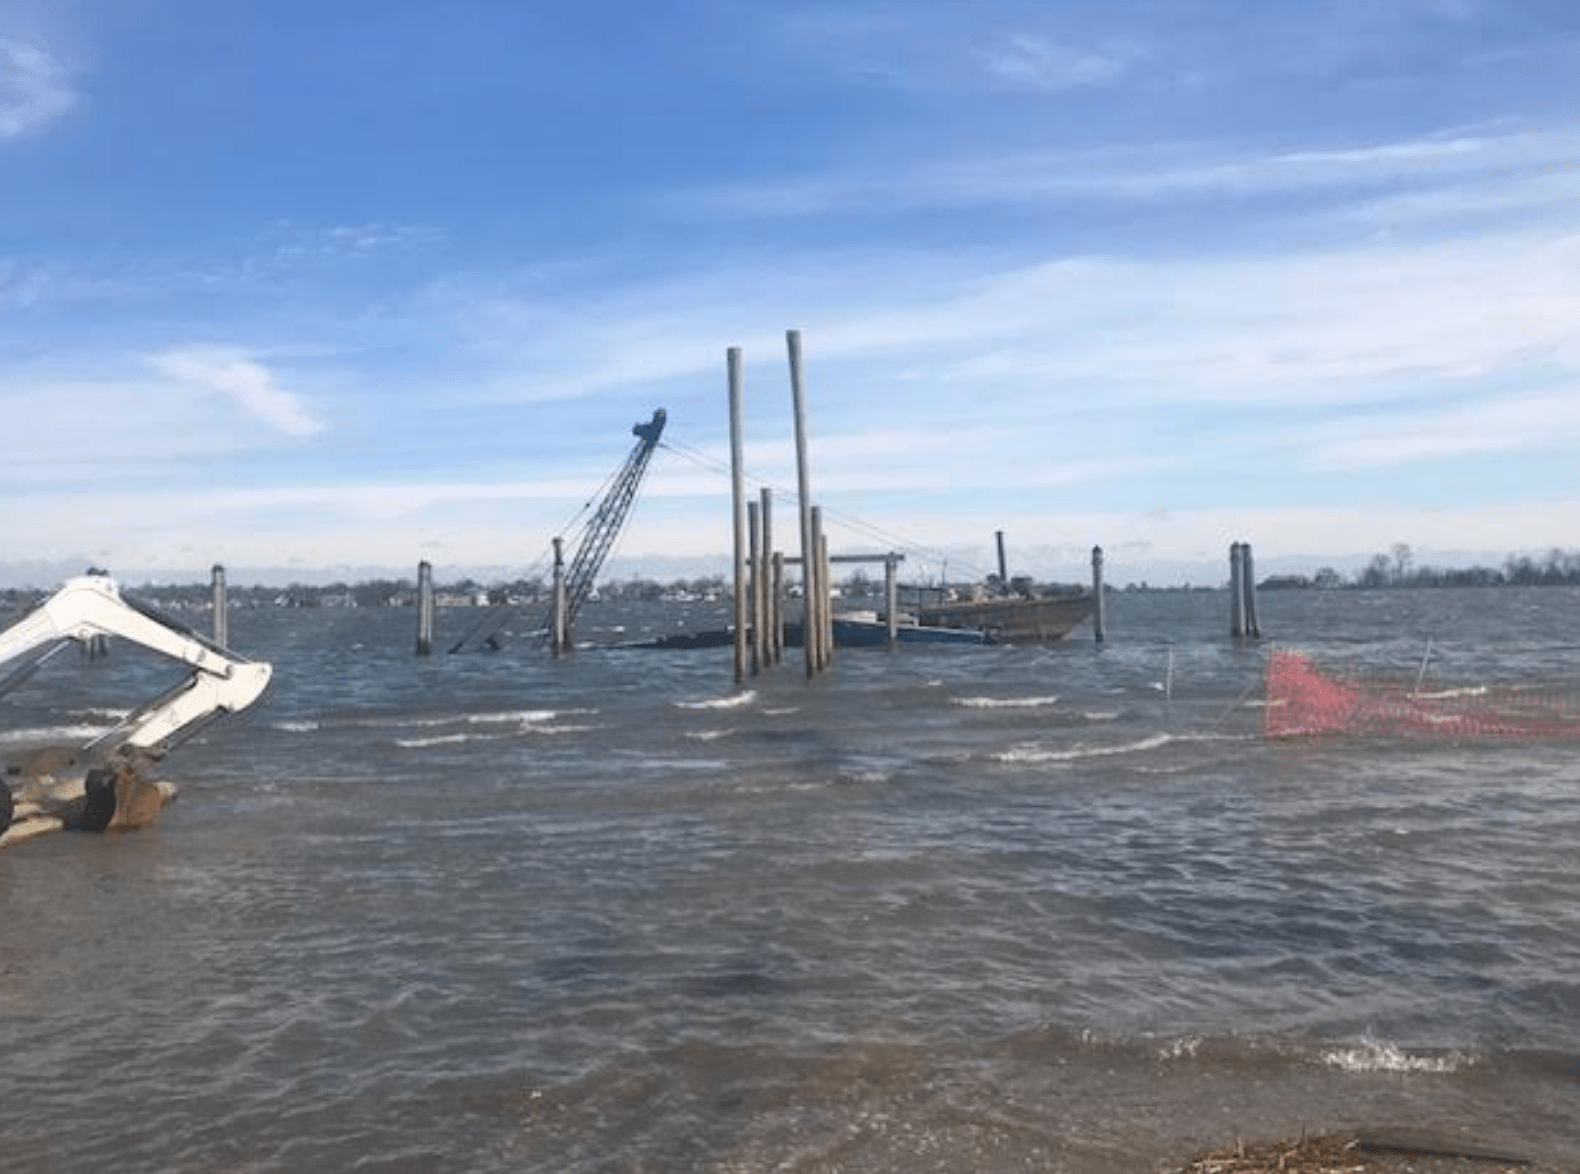 A barge that had a crane on it took on water overnight and at approximately 10:20 both crane and barge sunk. Contributed photo